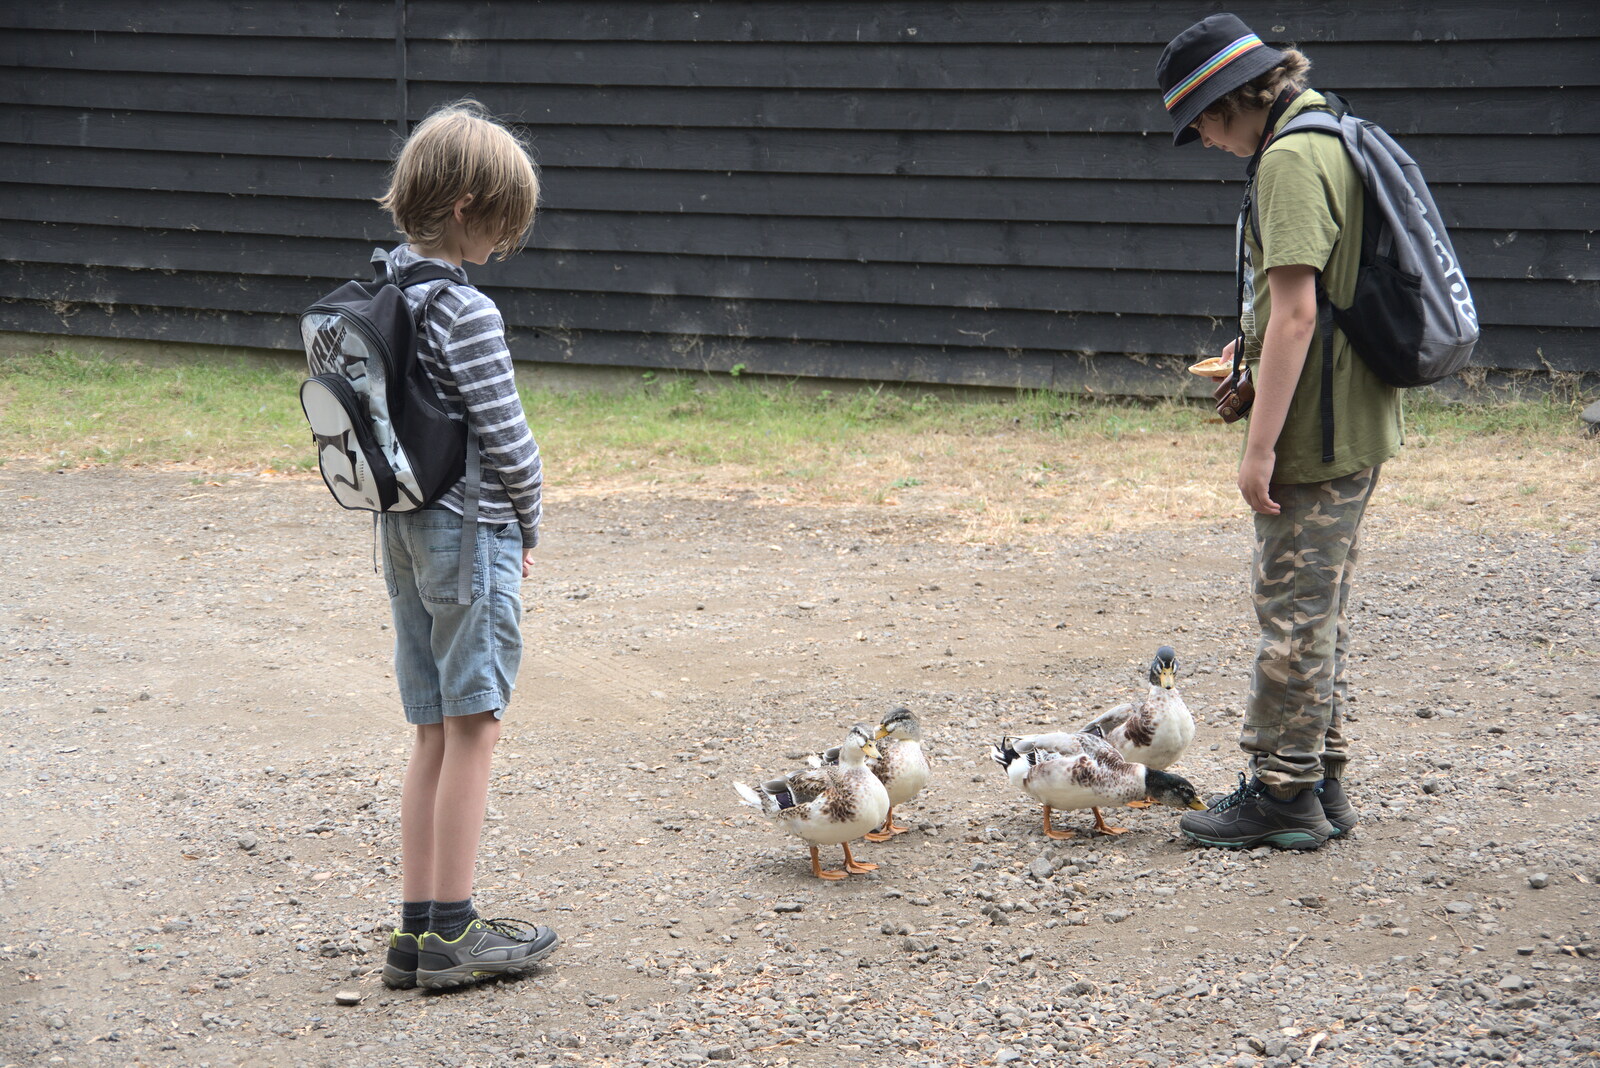 Ducks peck at Fred's shoes from A Trip to Orford Ness, Orford, Suffolk - 16th August 2022